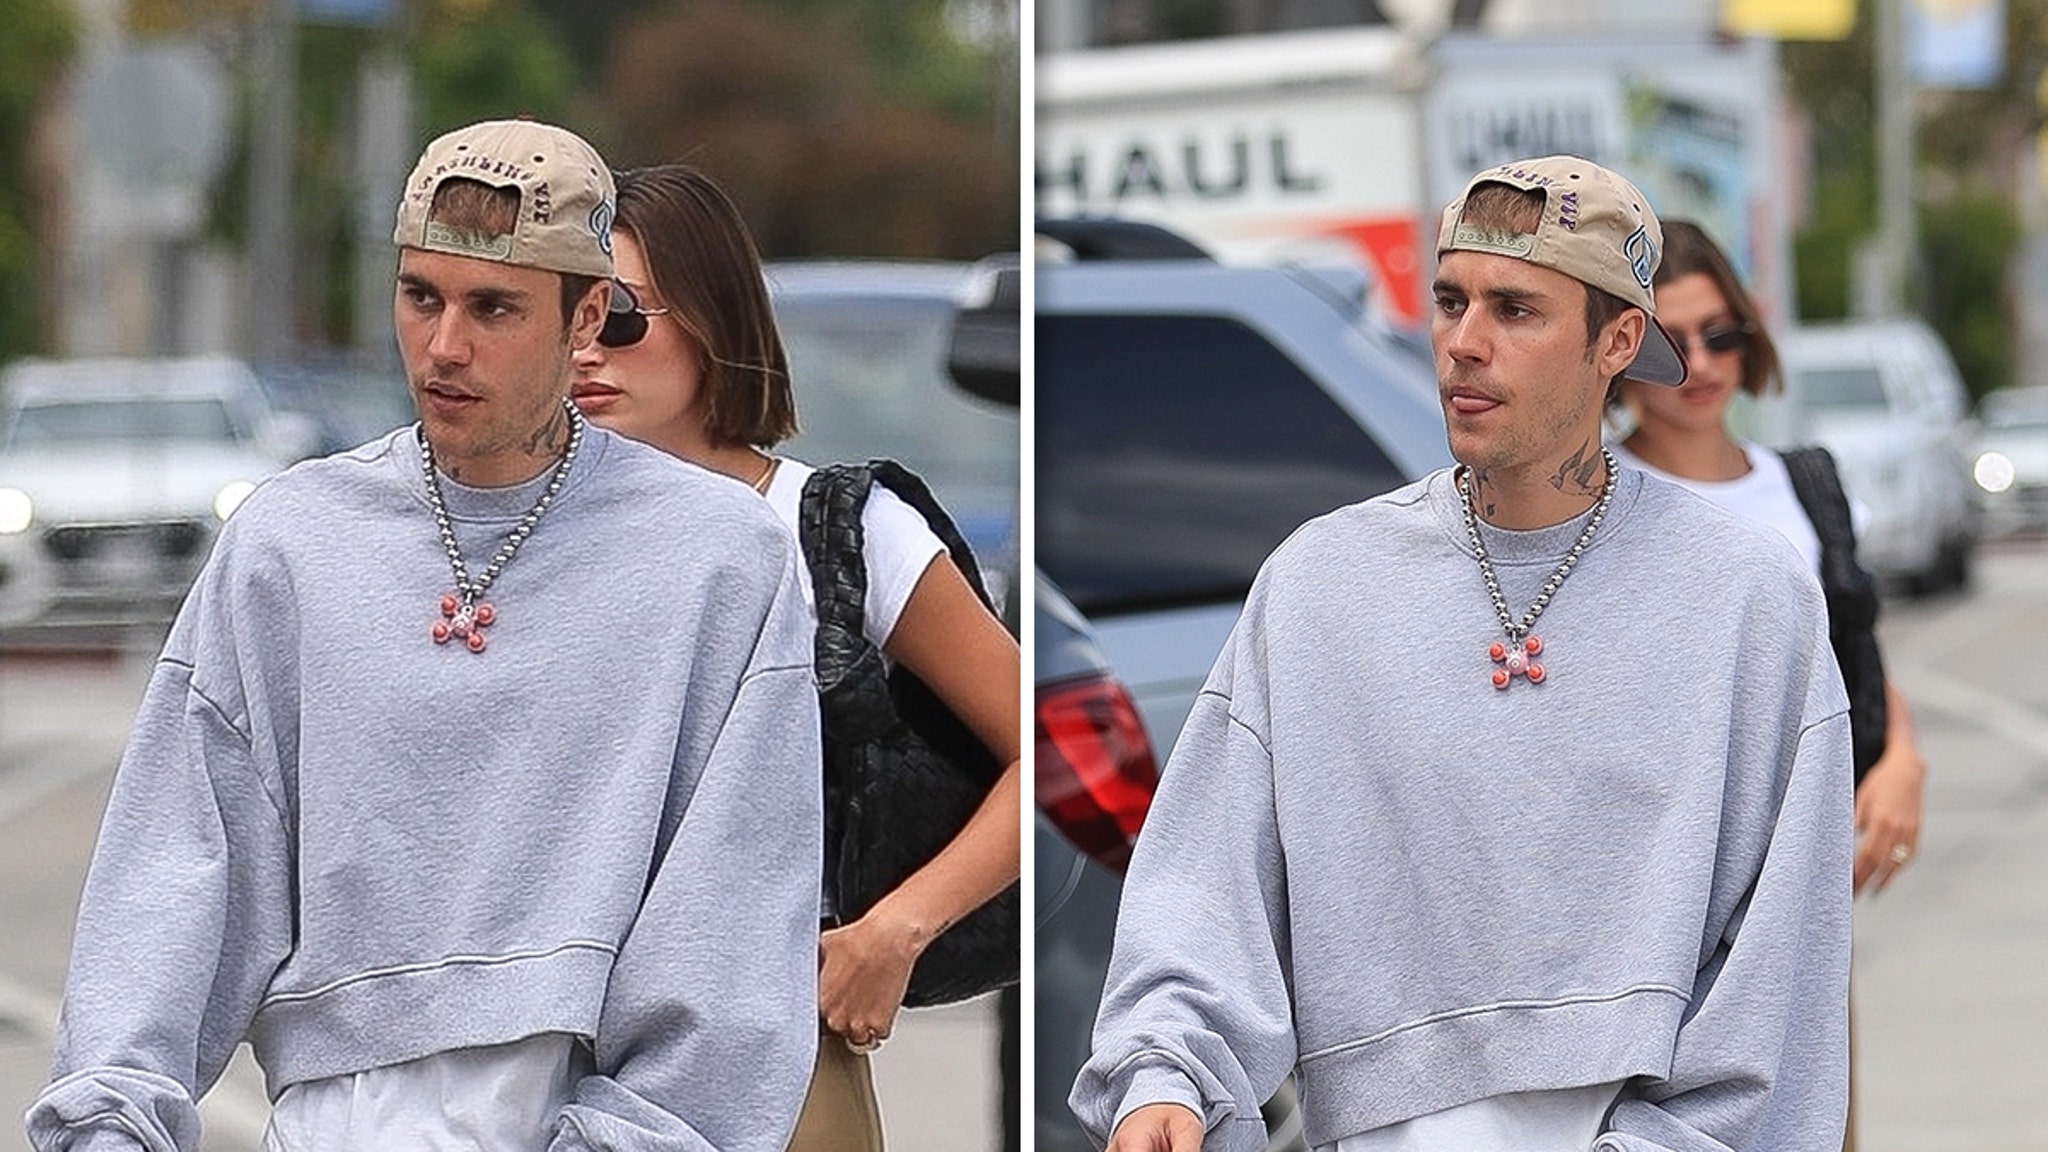 Justin Bieber couldn’t stop grabbing his crotch after leaving a restaurant